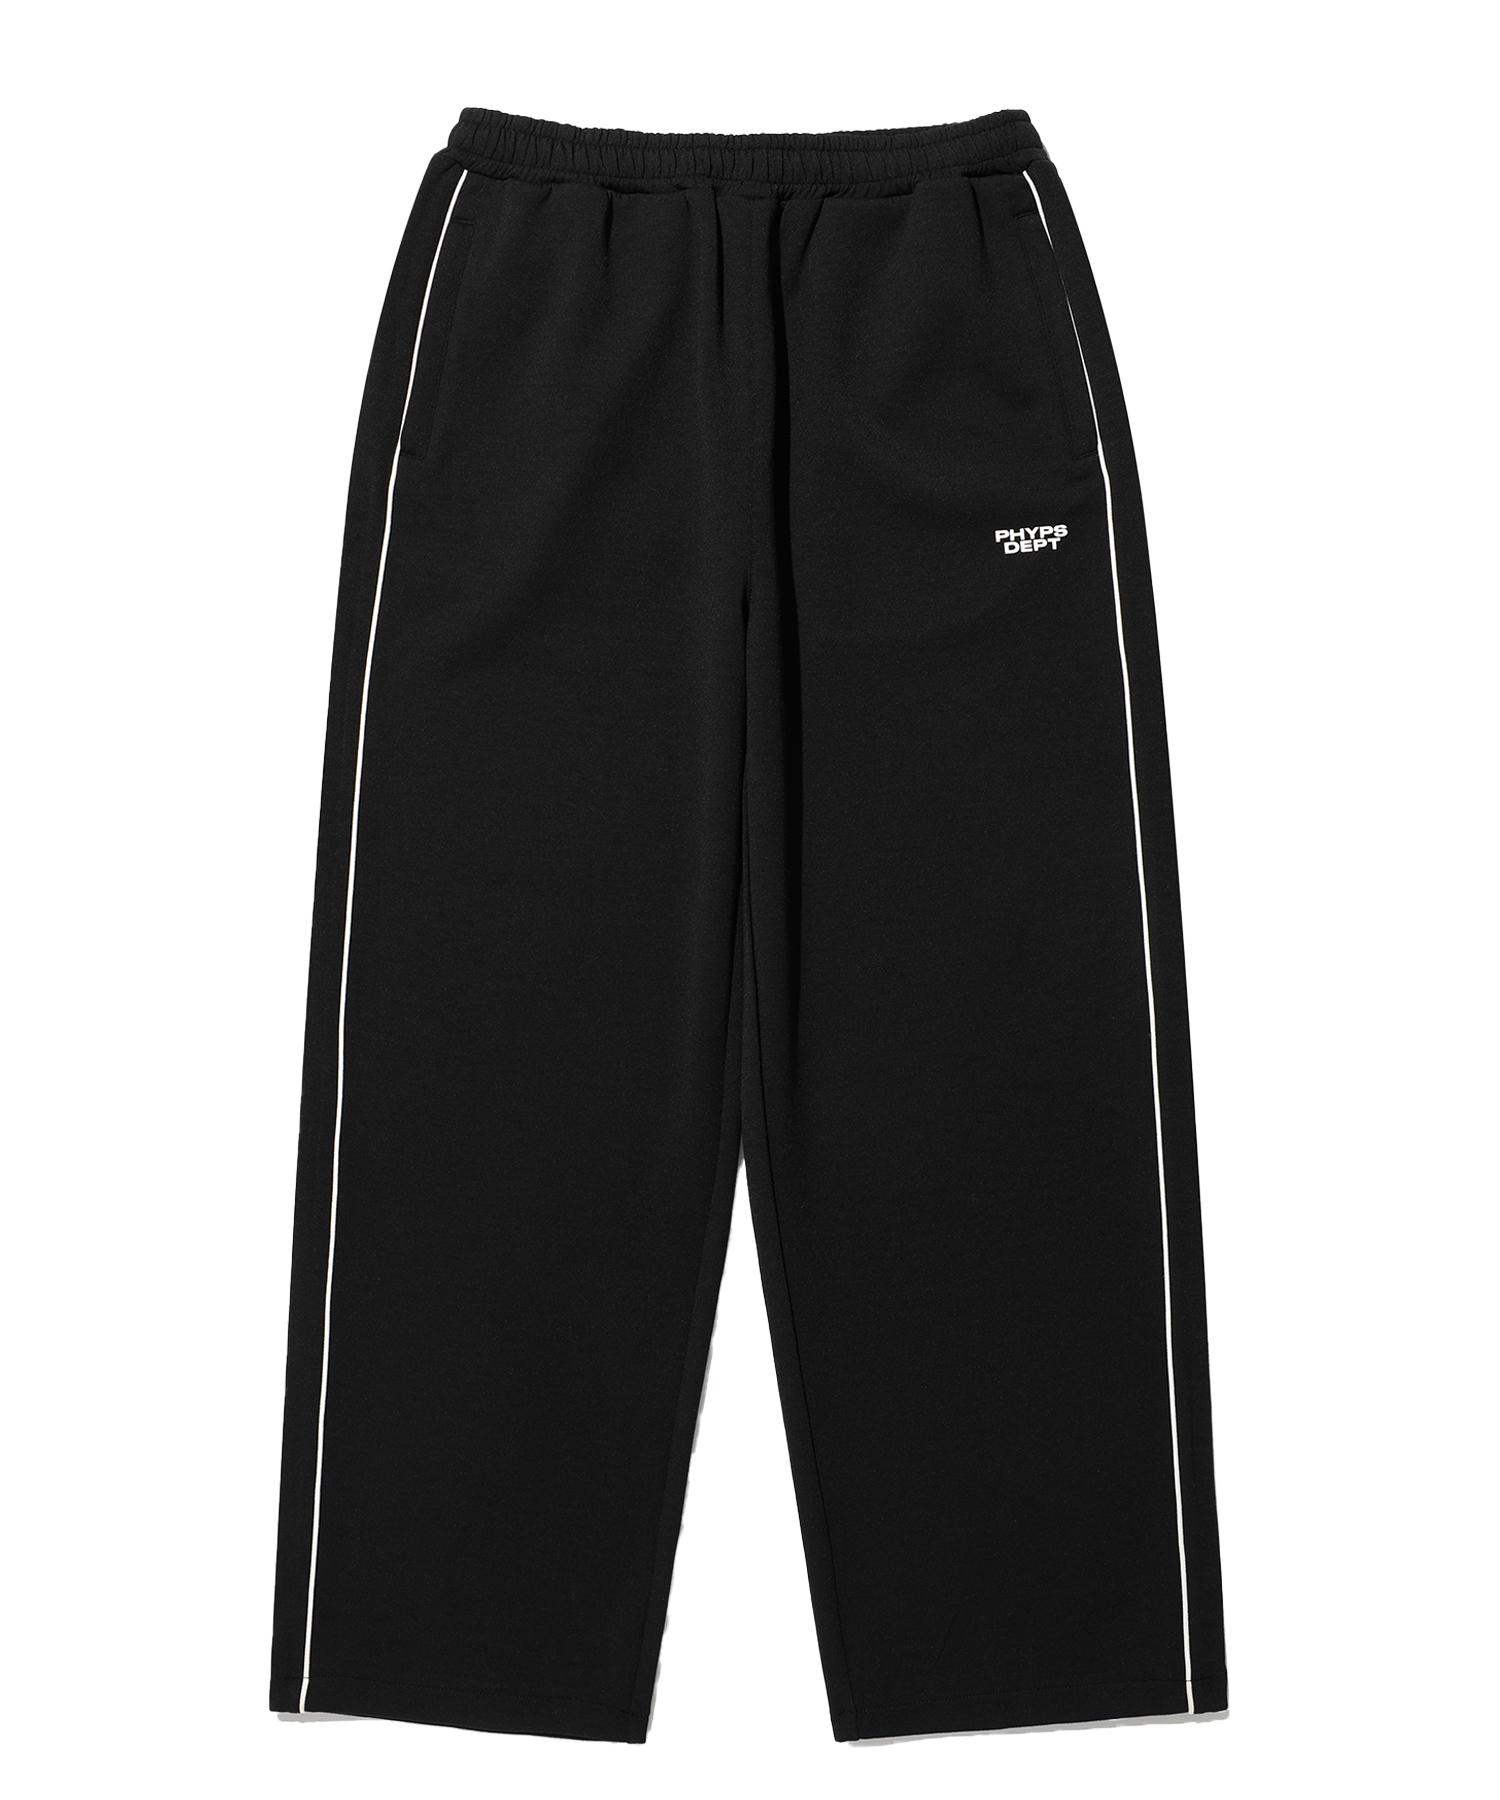 PIPING JERSEY TRACK PANTS BLACK